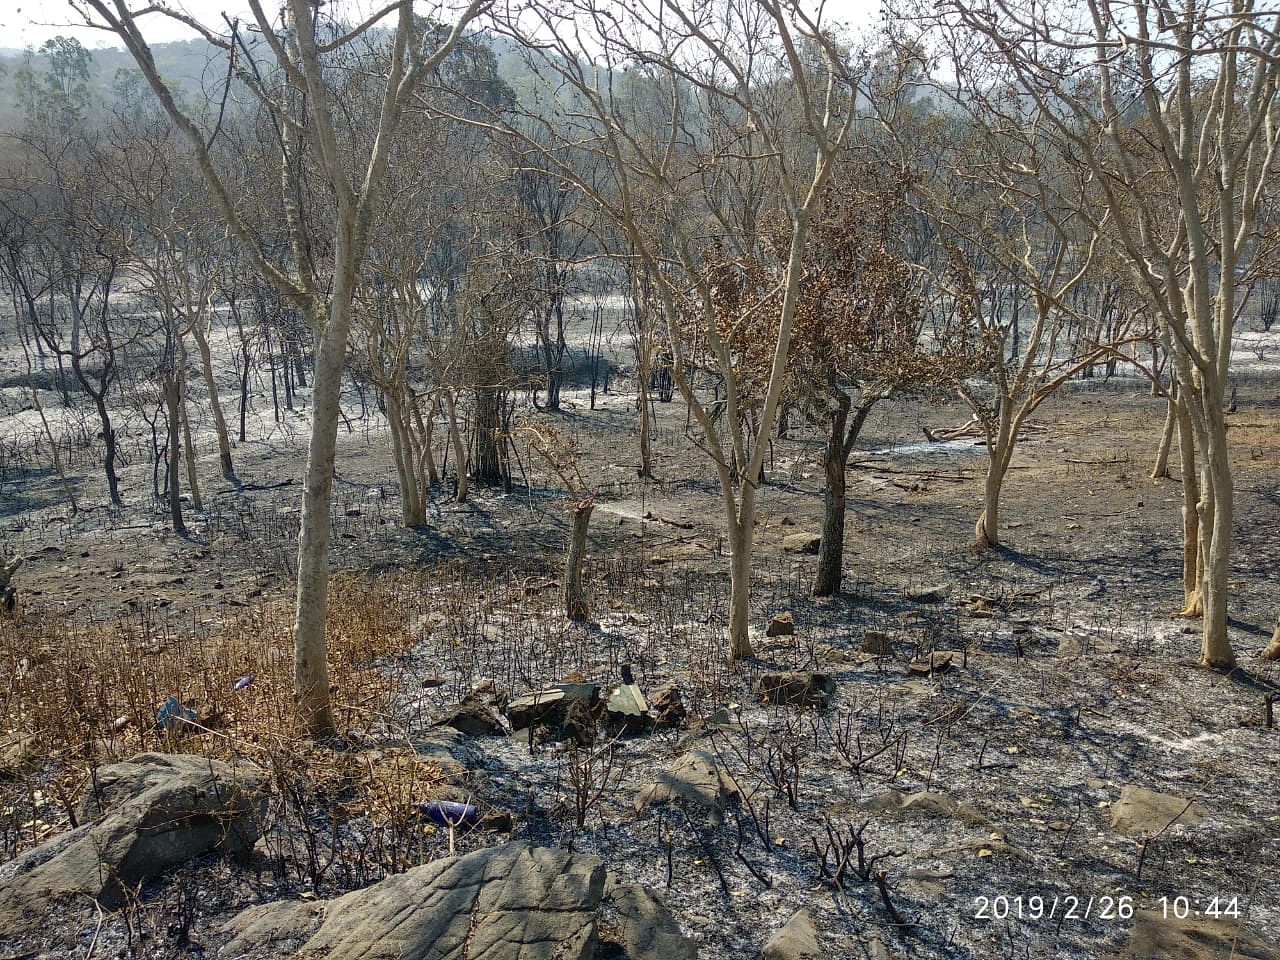 Charred trees in Bandipur National Park. (DH Photo/T R Satish Kumar)